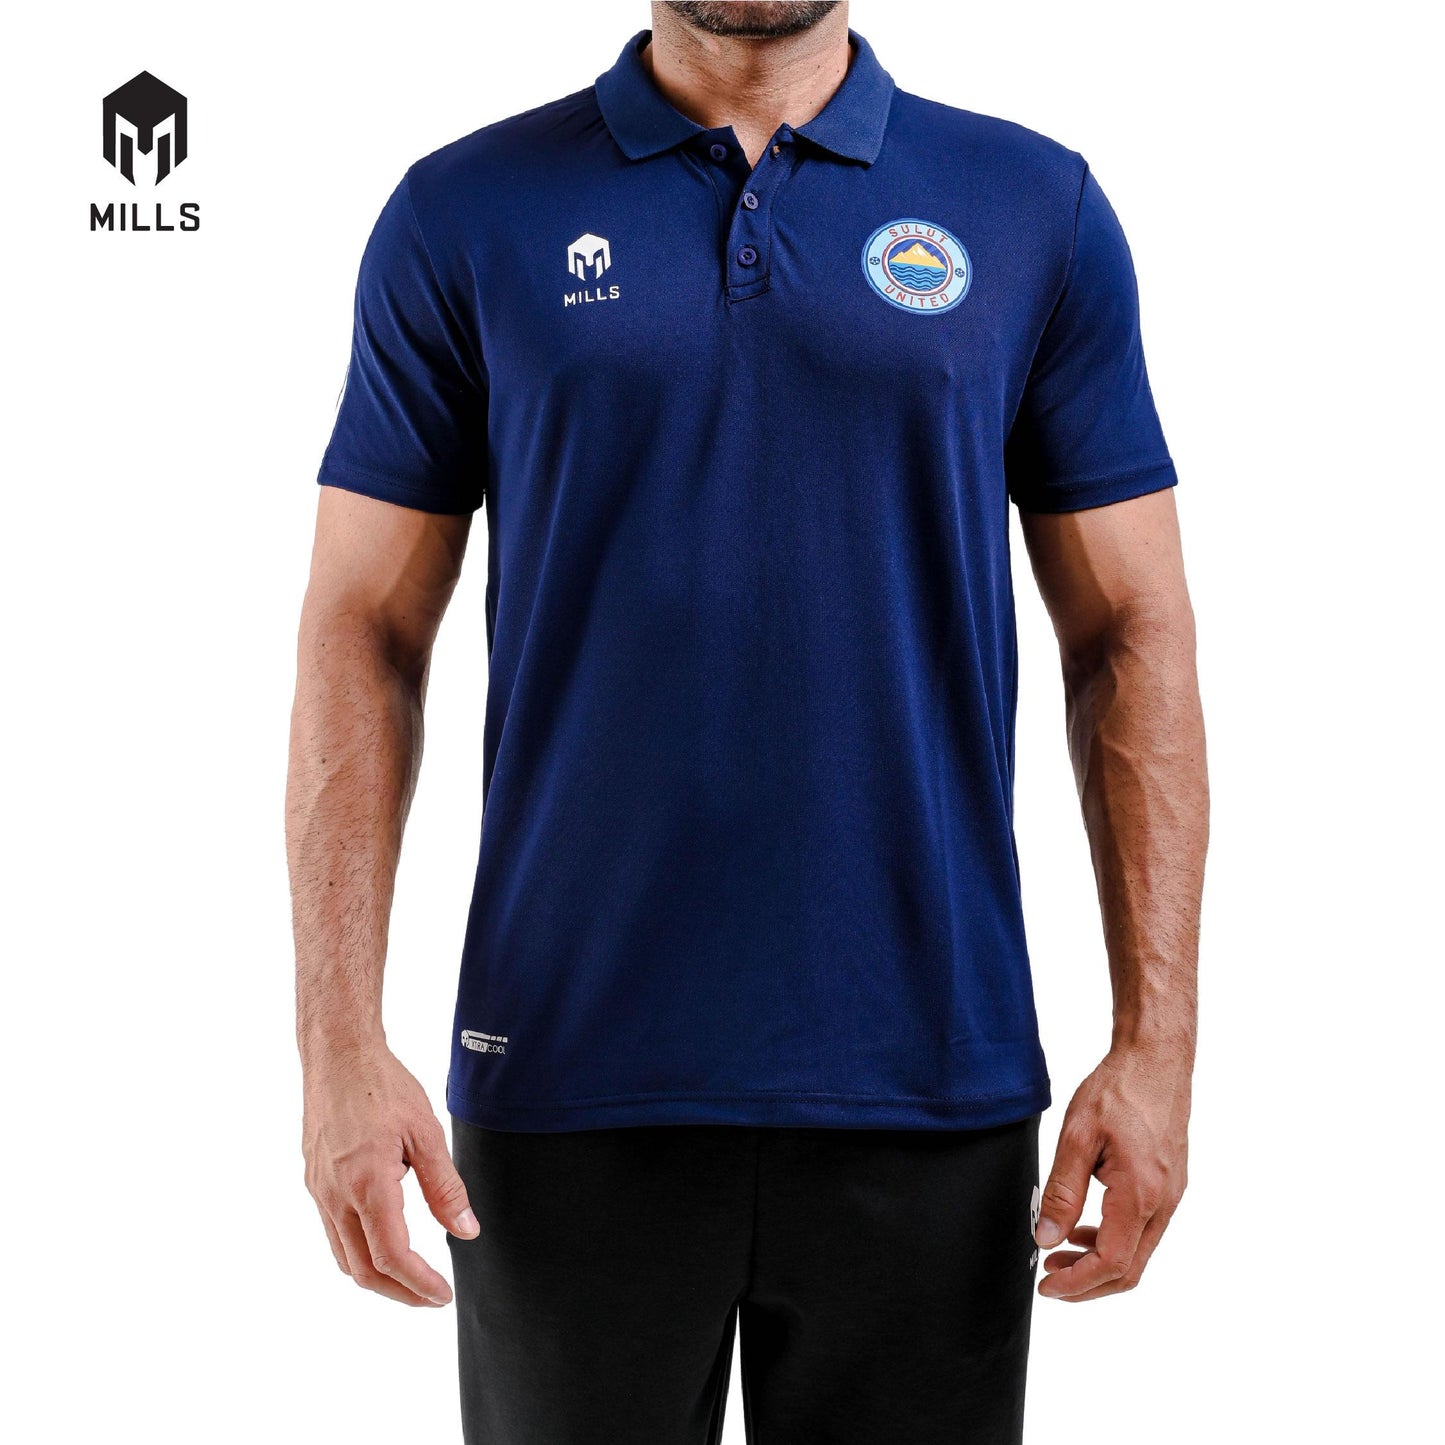 MILLS SULUT UNITED FC Polo Shirt 17032SUFC